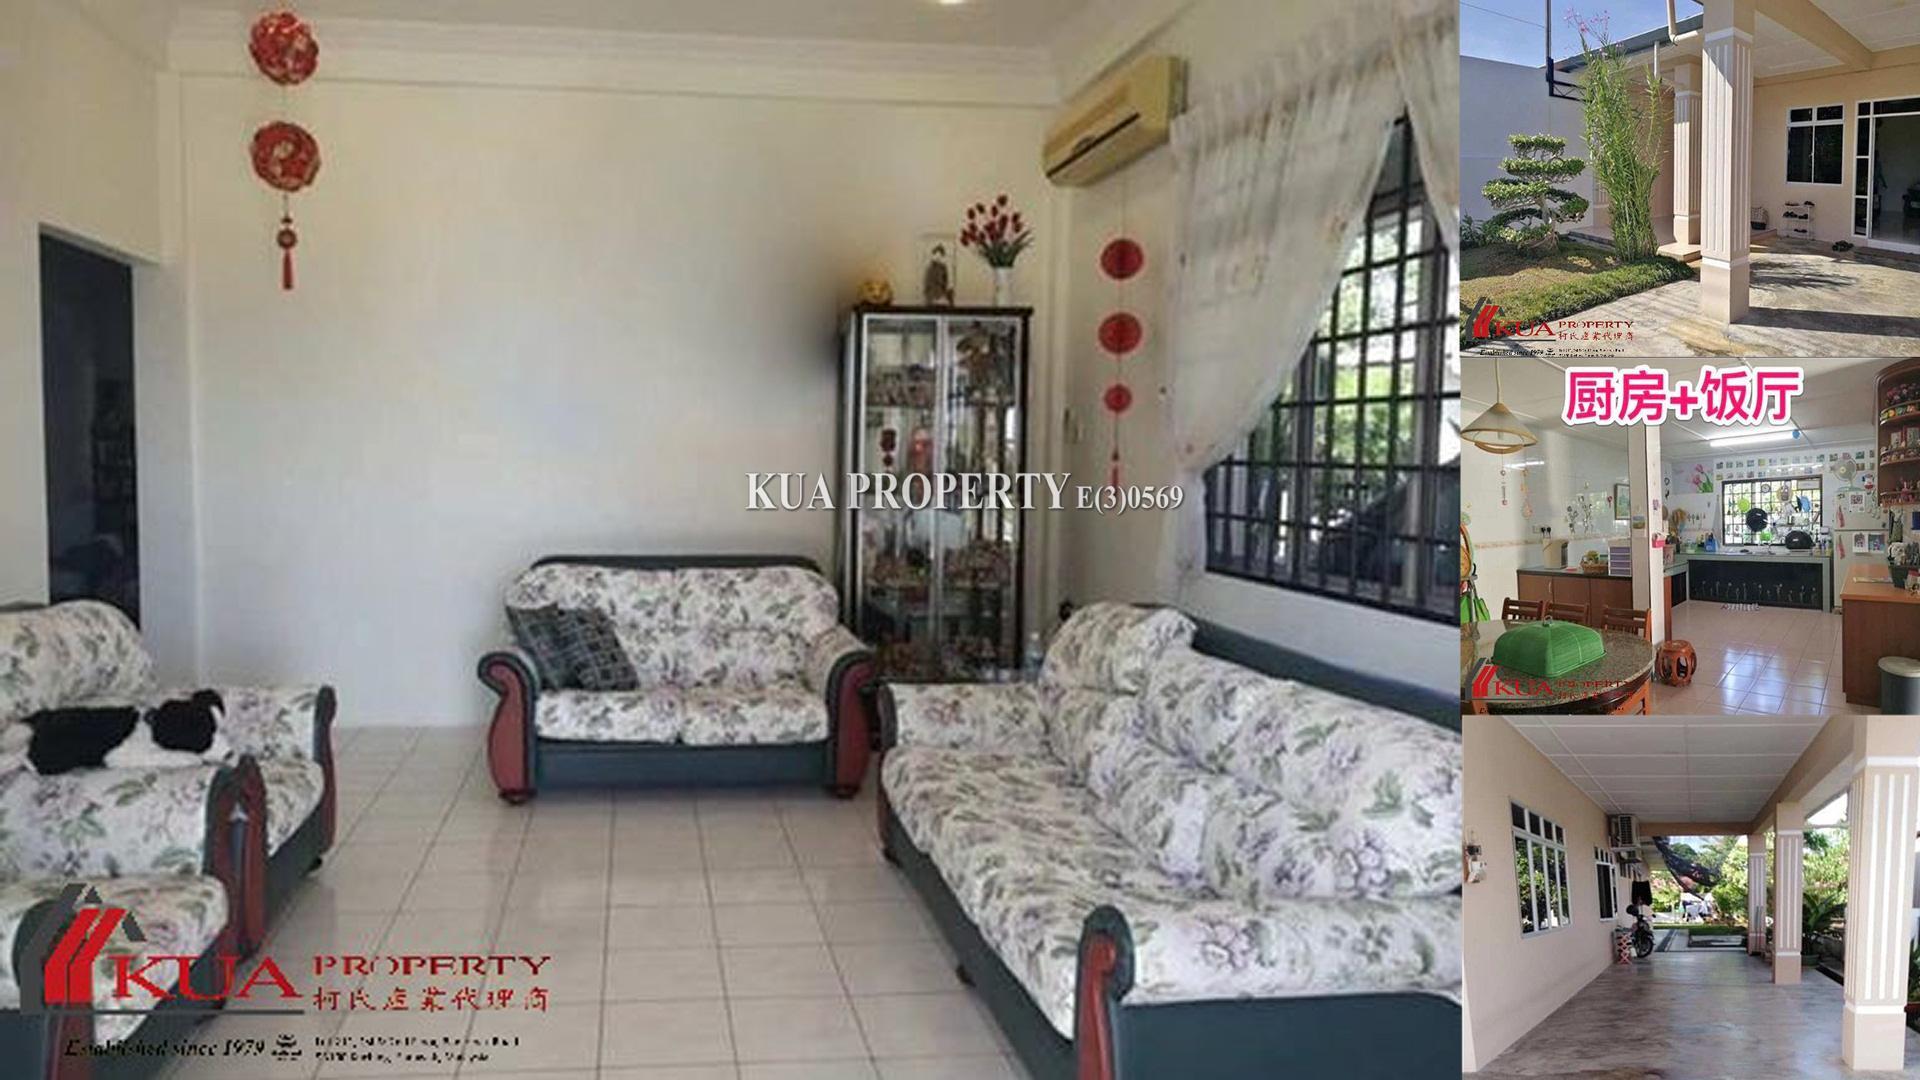 Single Storey Semi-Detached House For Sale! at 5th Mile, Jalan Semaba